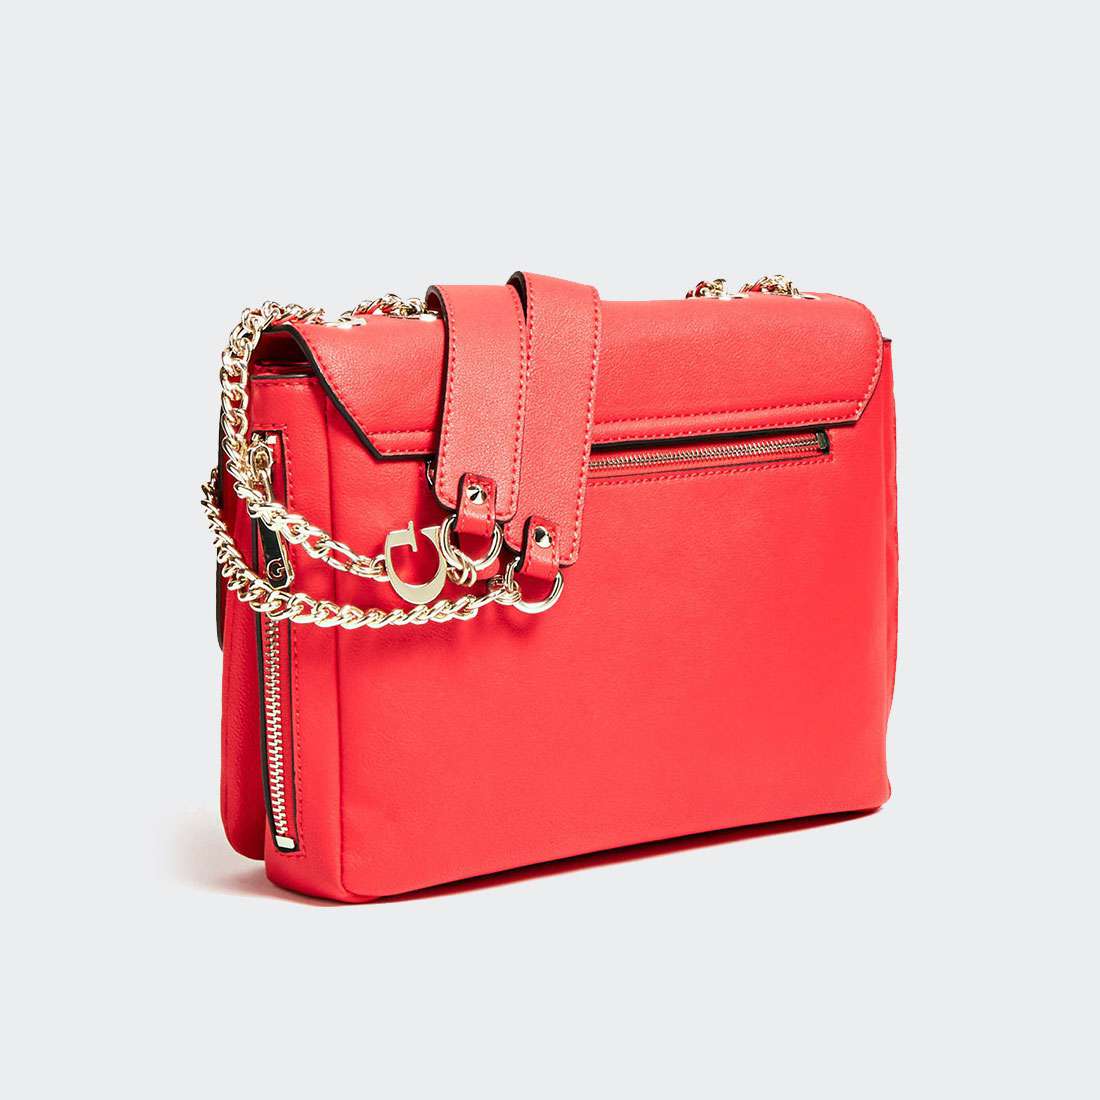 MALA GUESS CHAIN CONVERTIBLE XBODY FLAP RED